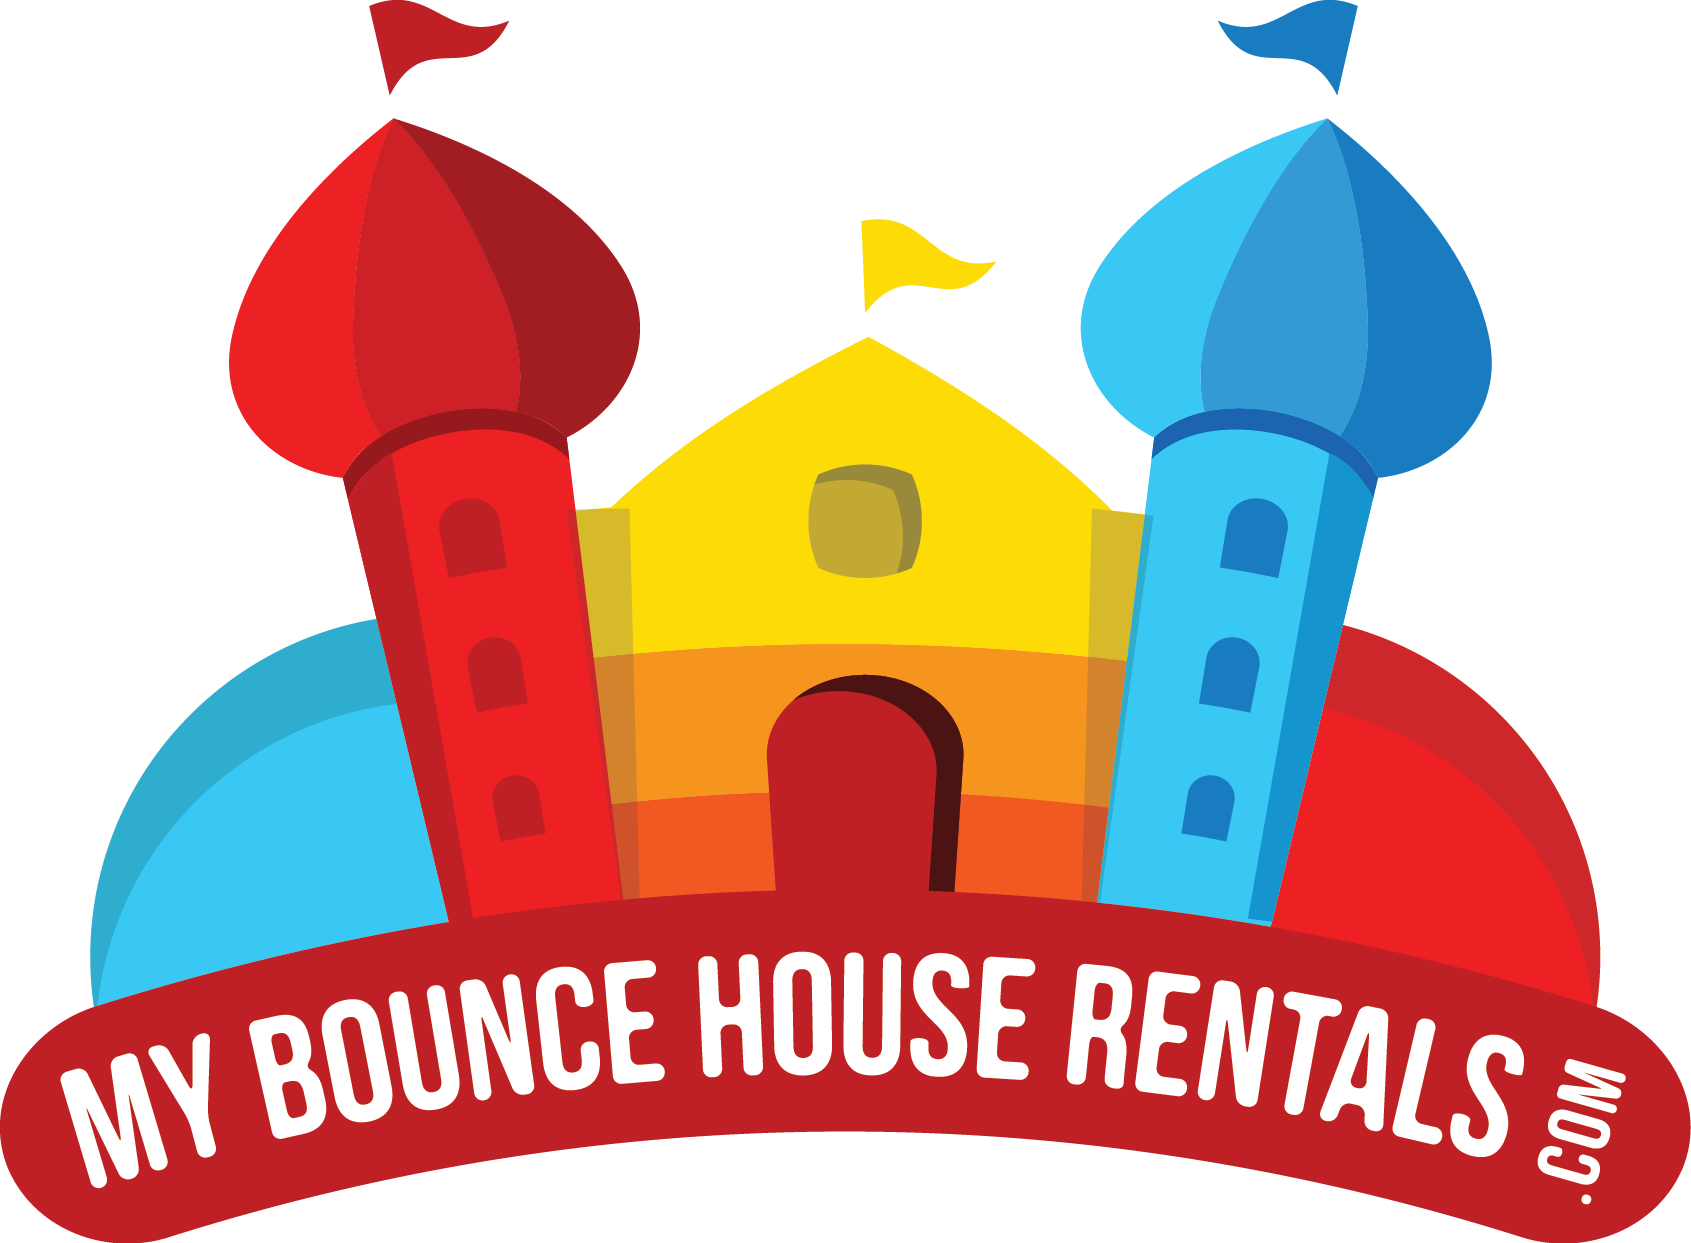 My bounce house rentals of richmond's Logo